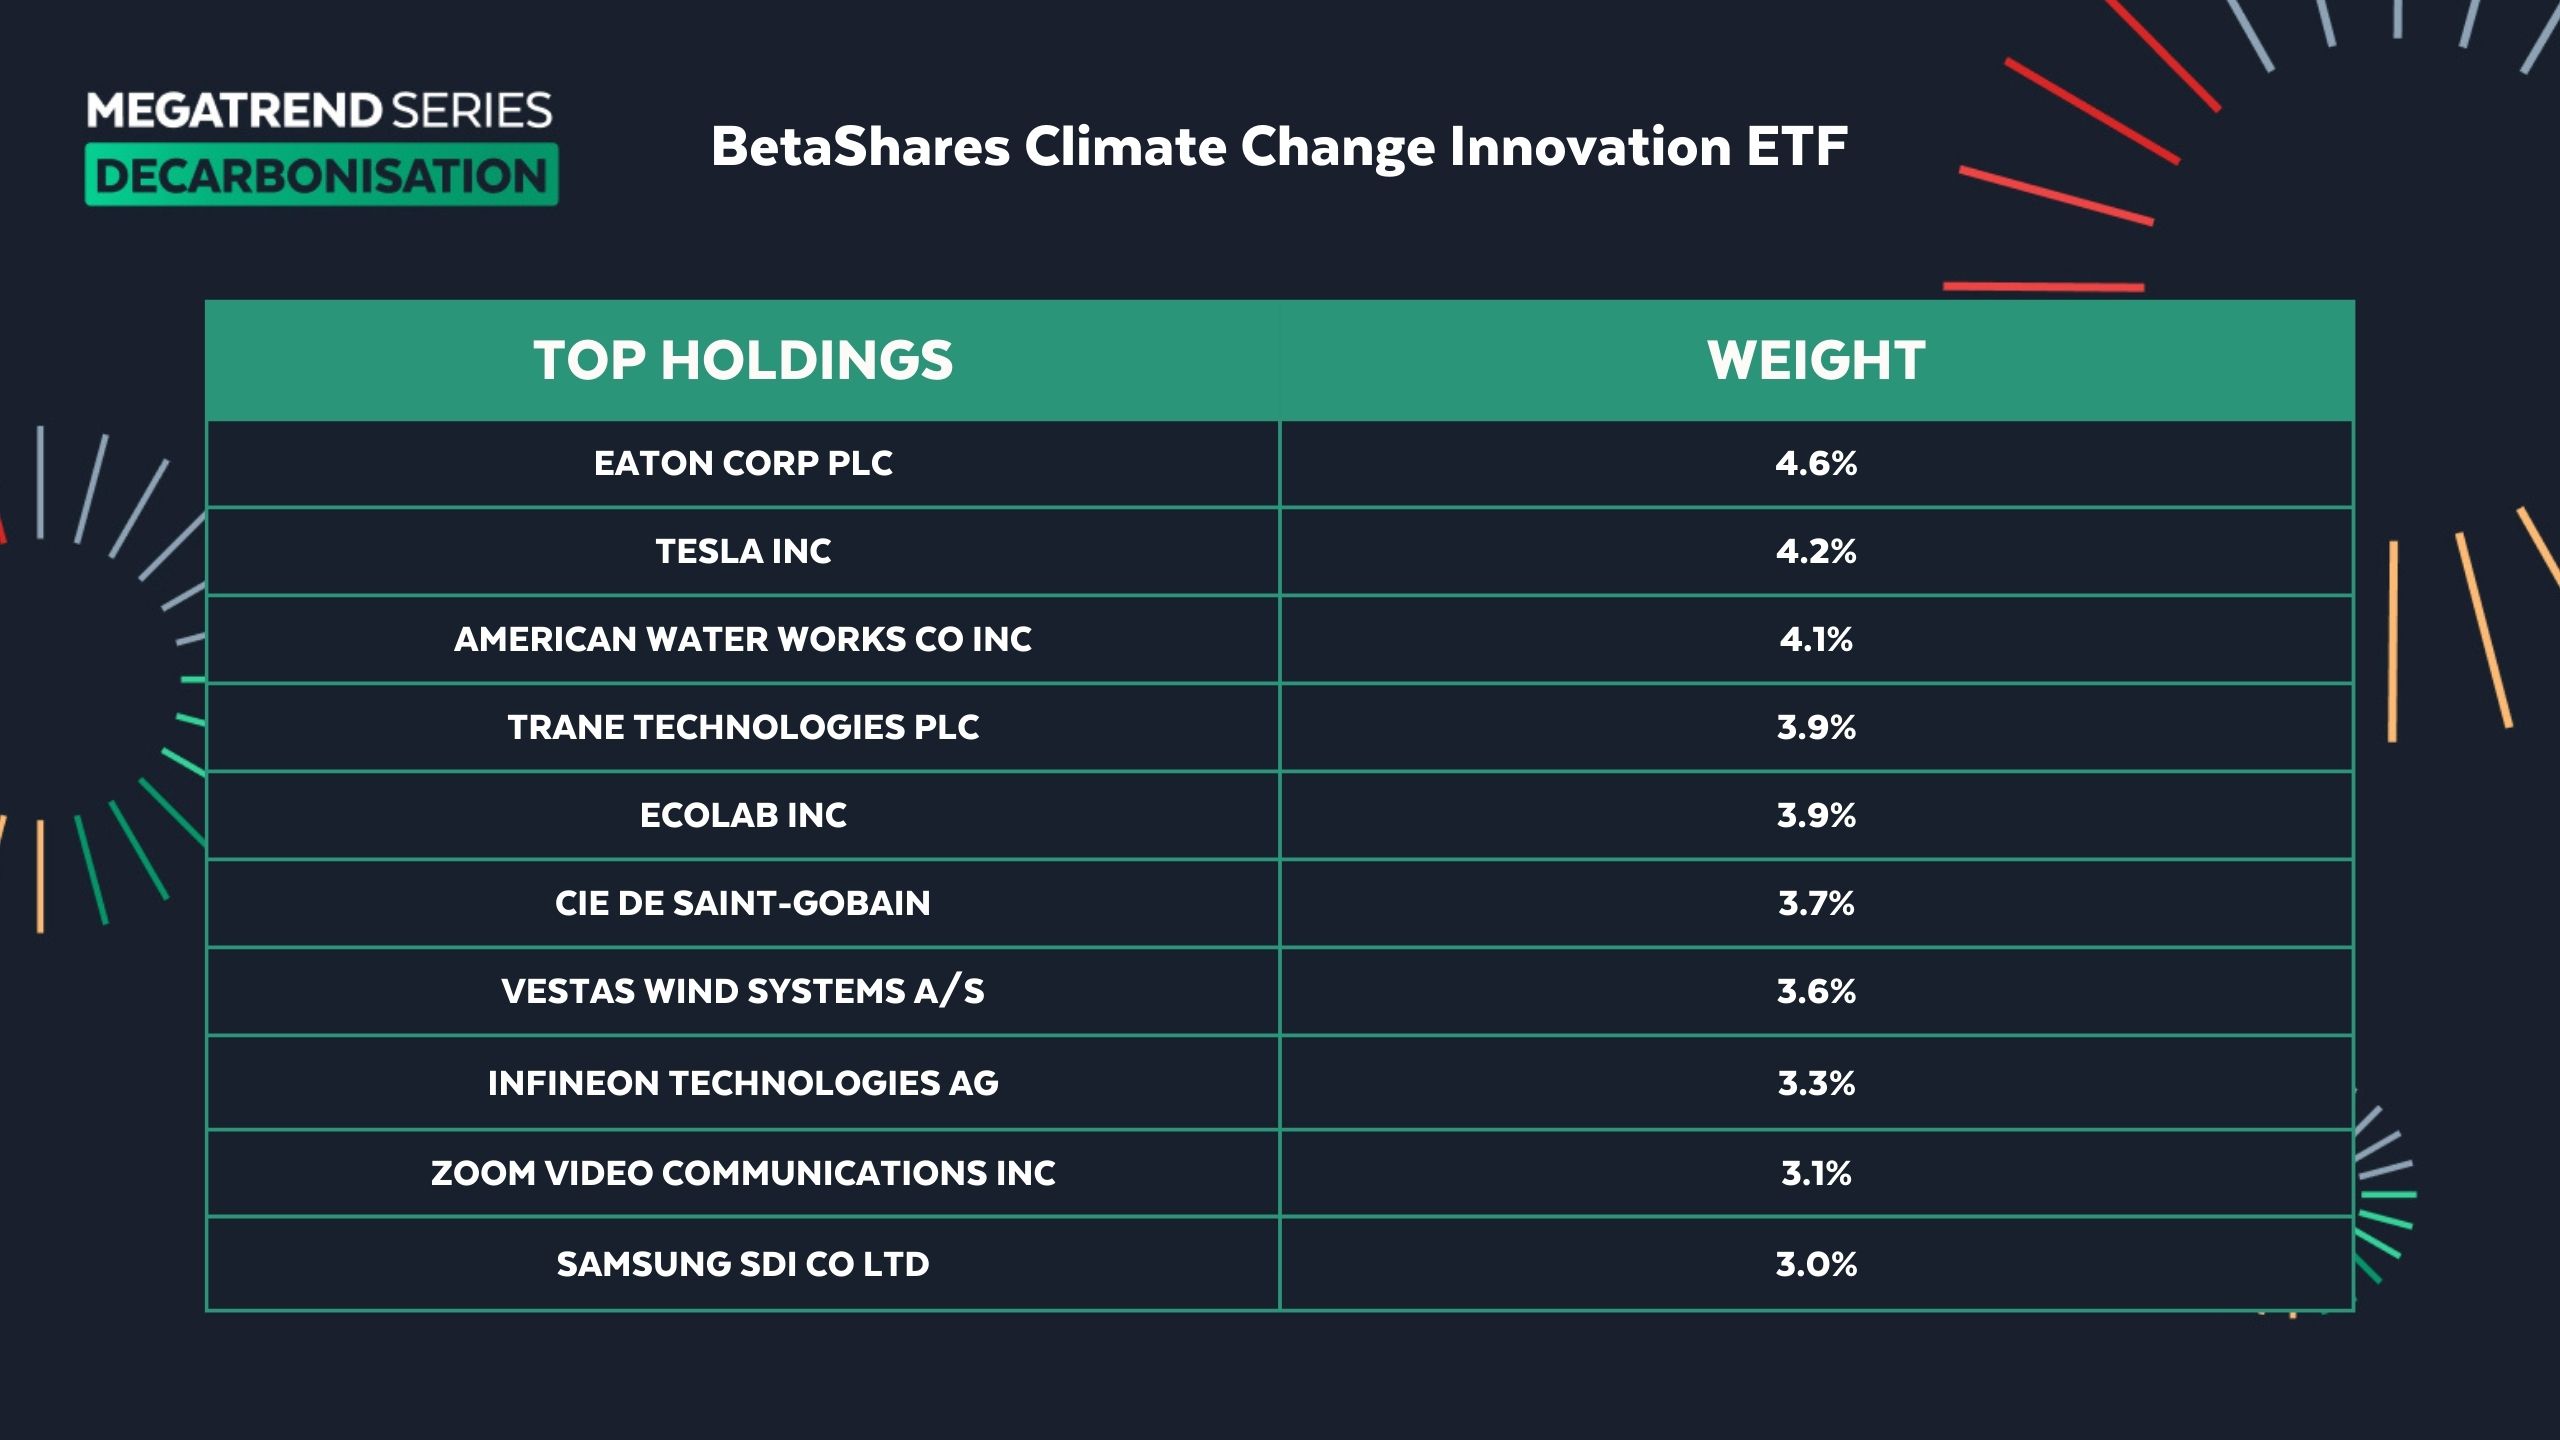 Top 10 holdings and weightings for ERTH. (Source: BetaShares)